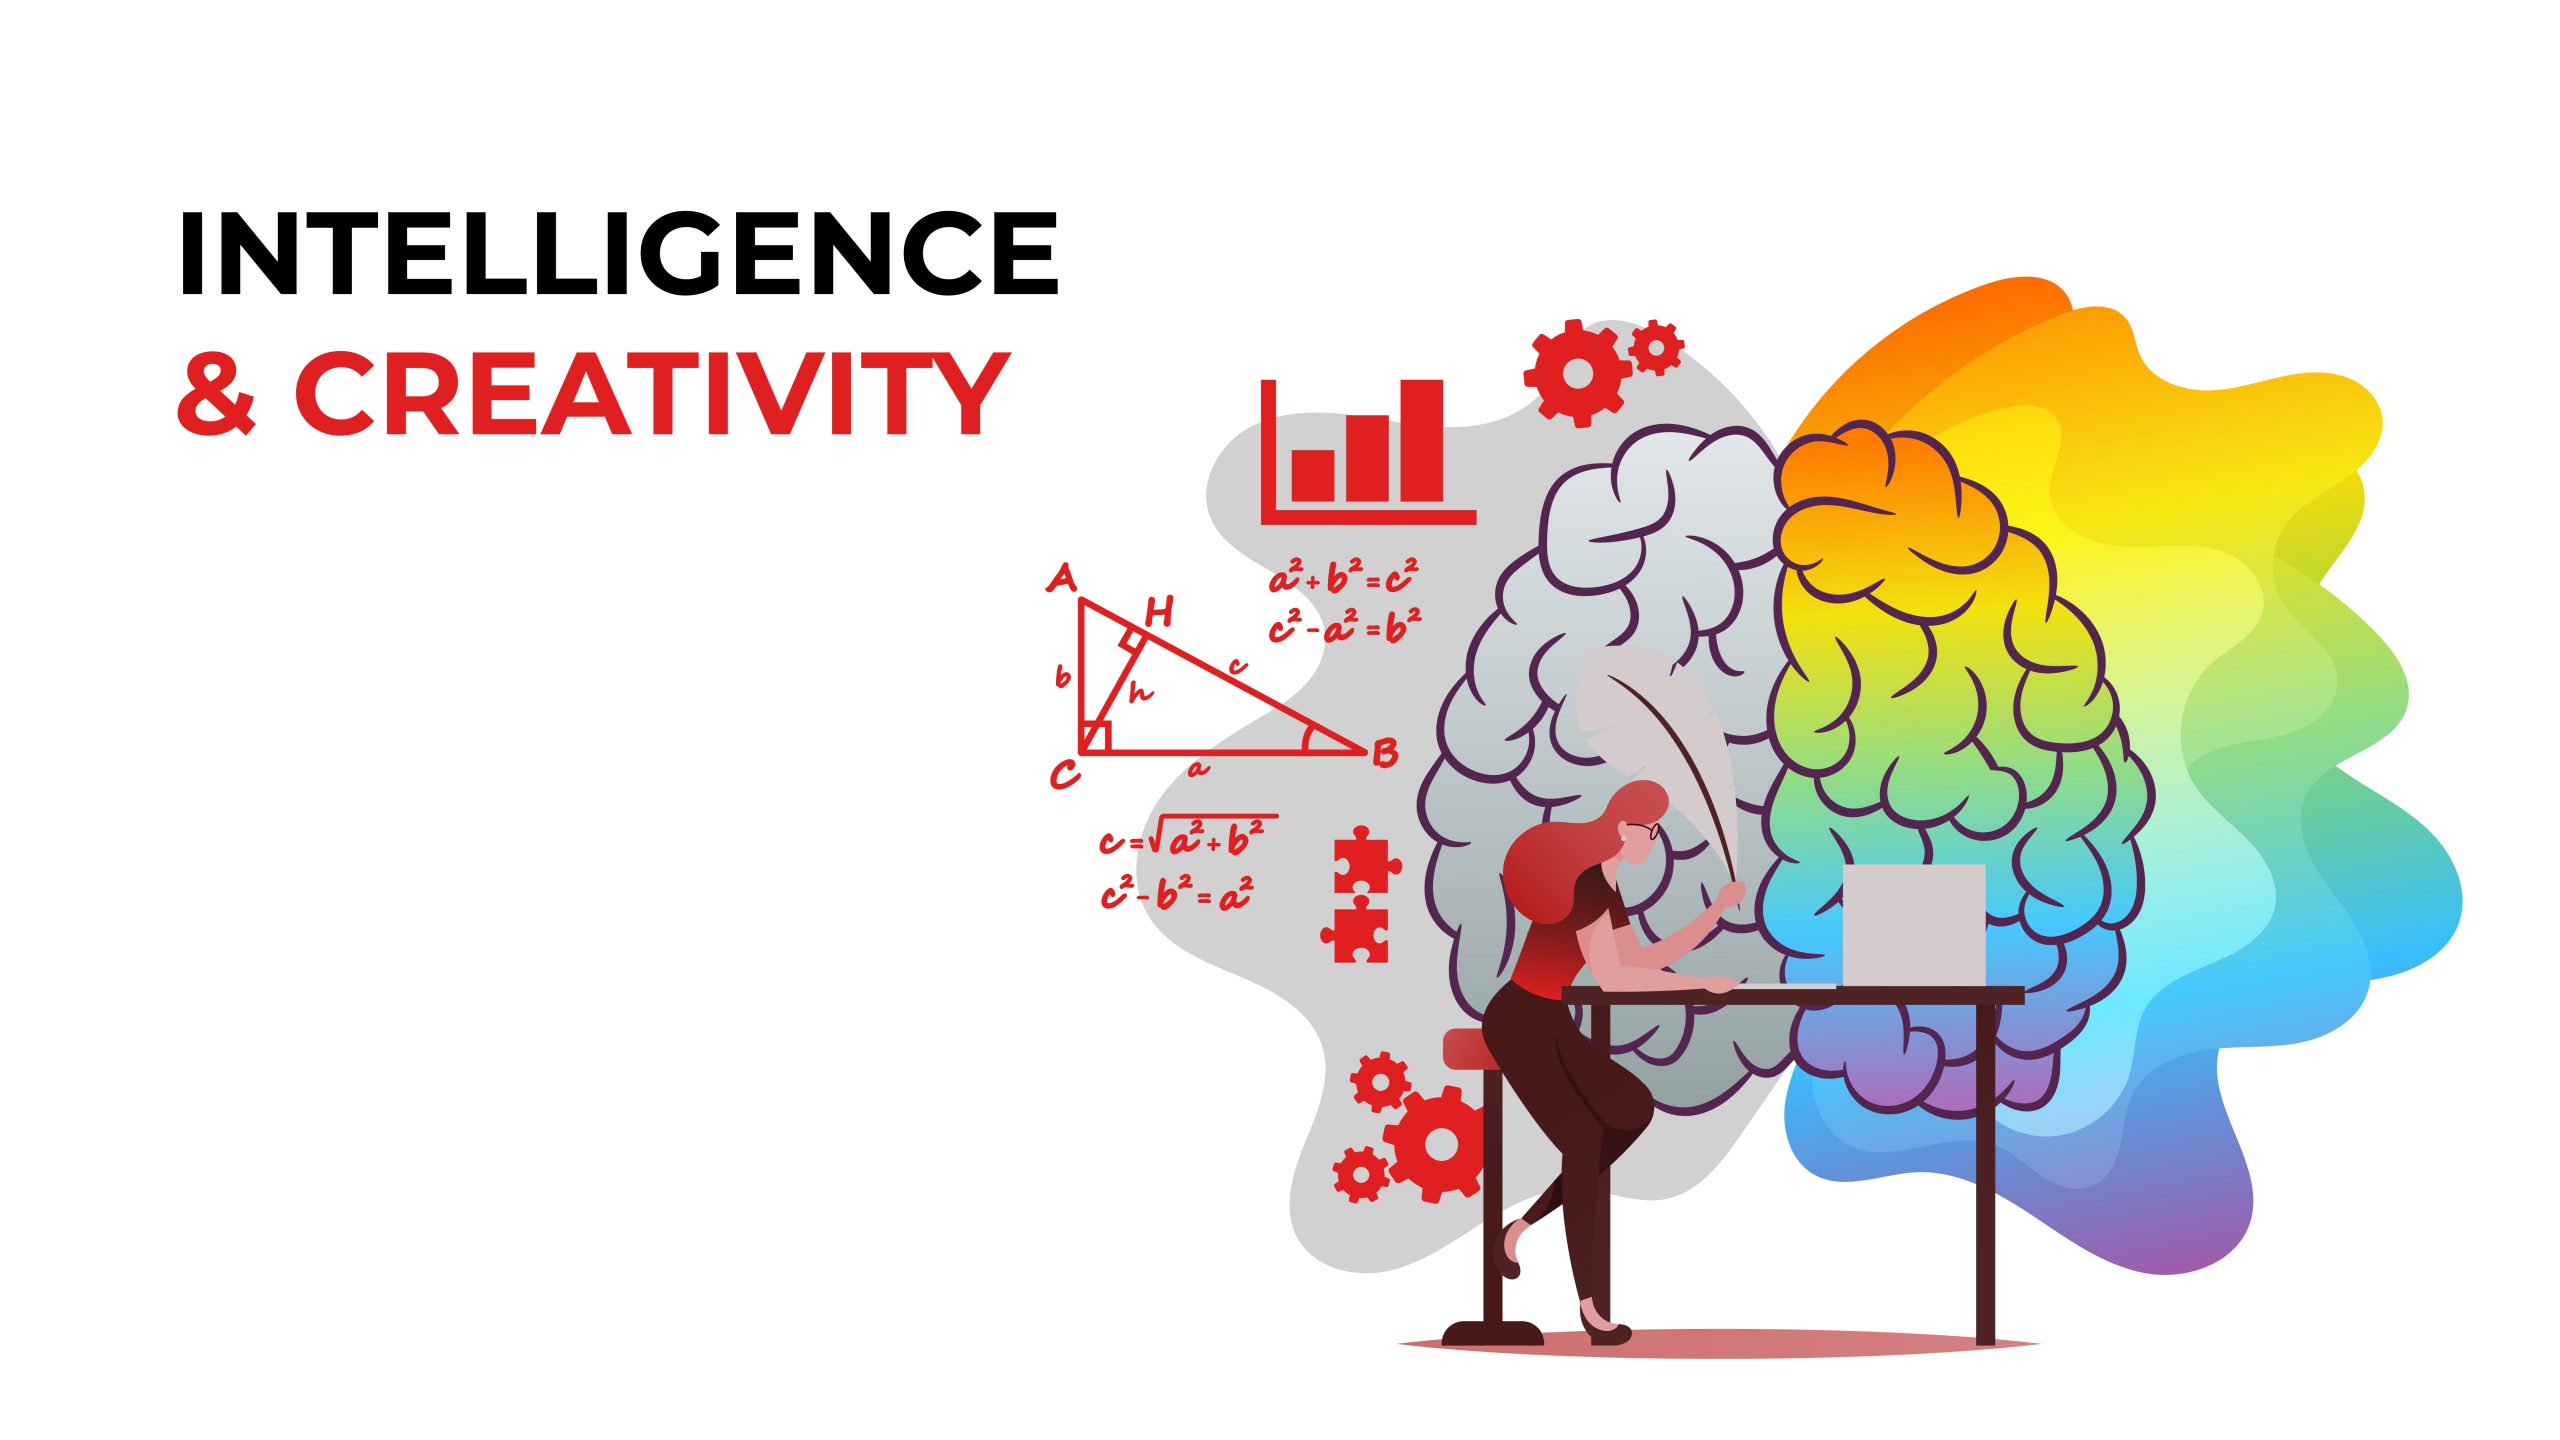 The relationship between creativity and intelligence